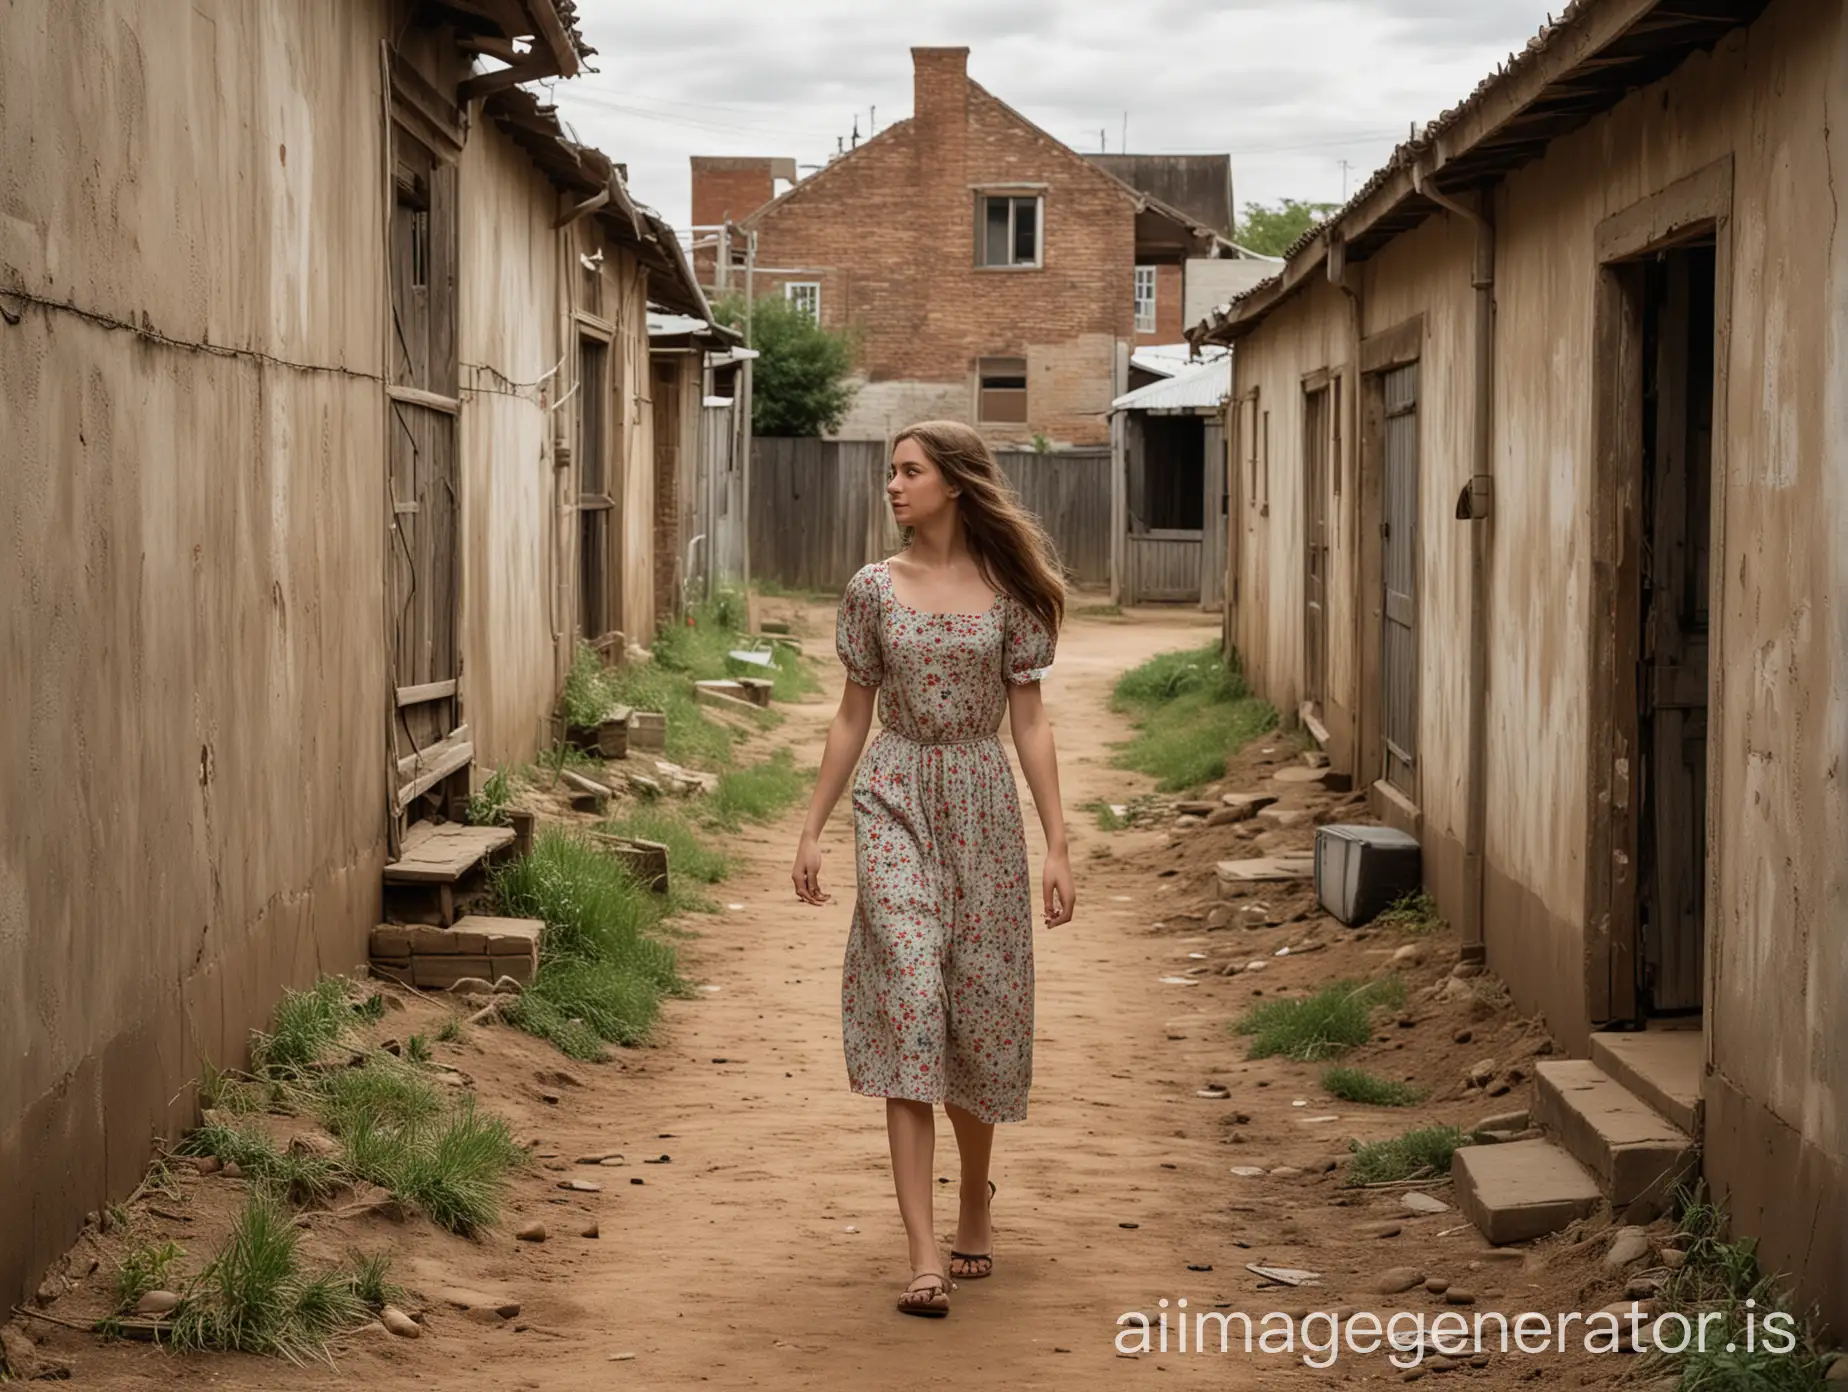 Local-Woman-Walking-Down-Dirt-Alley-Past-Old-Houses